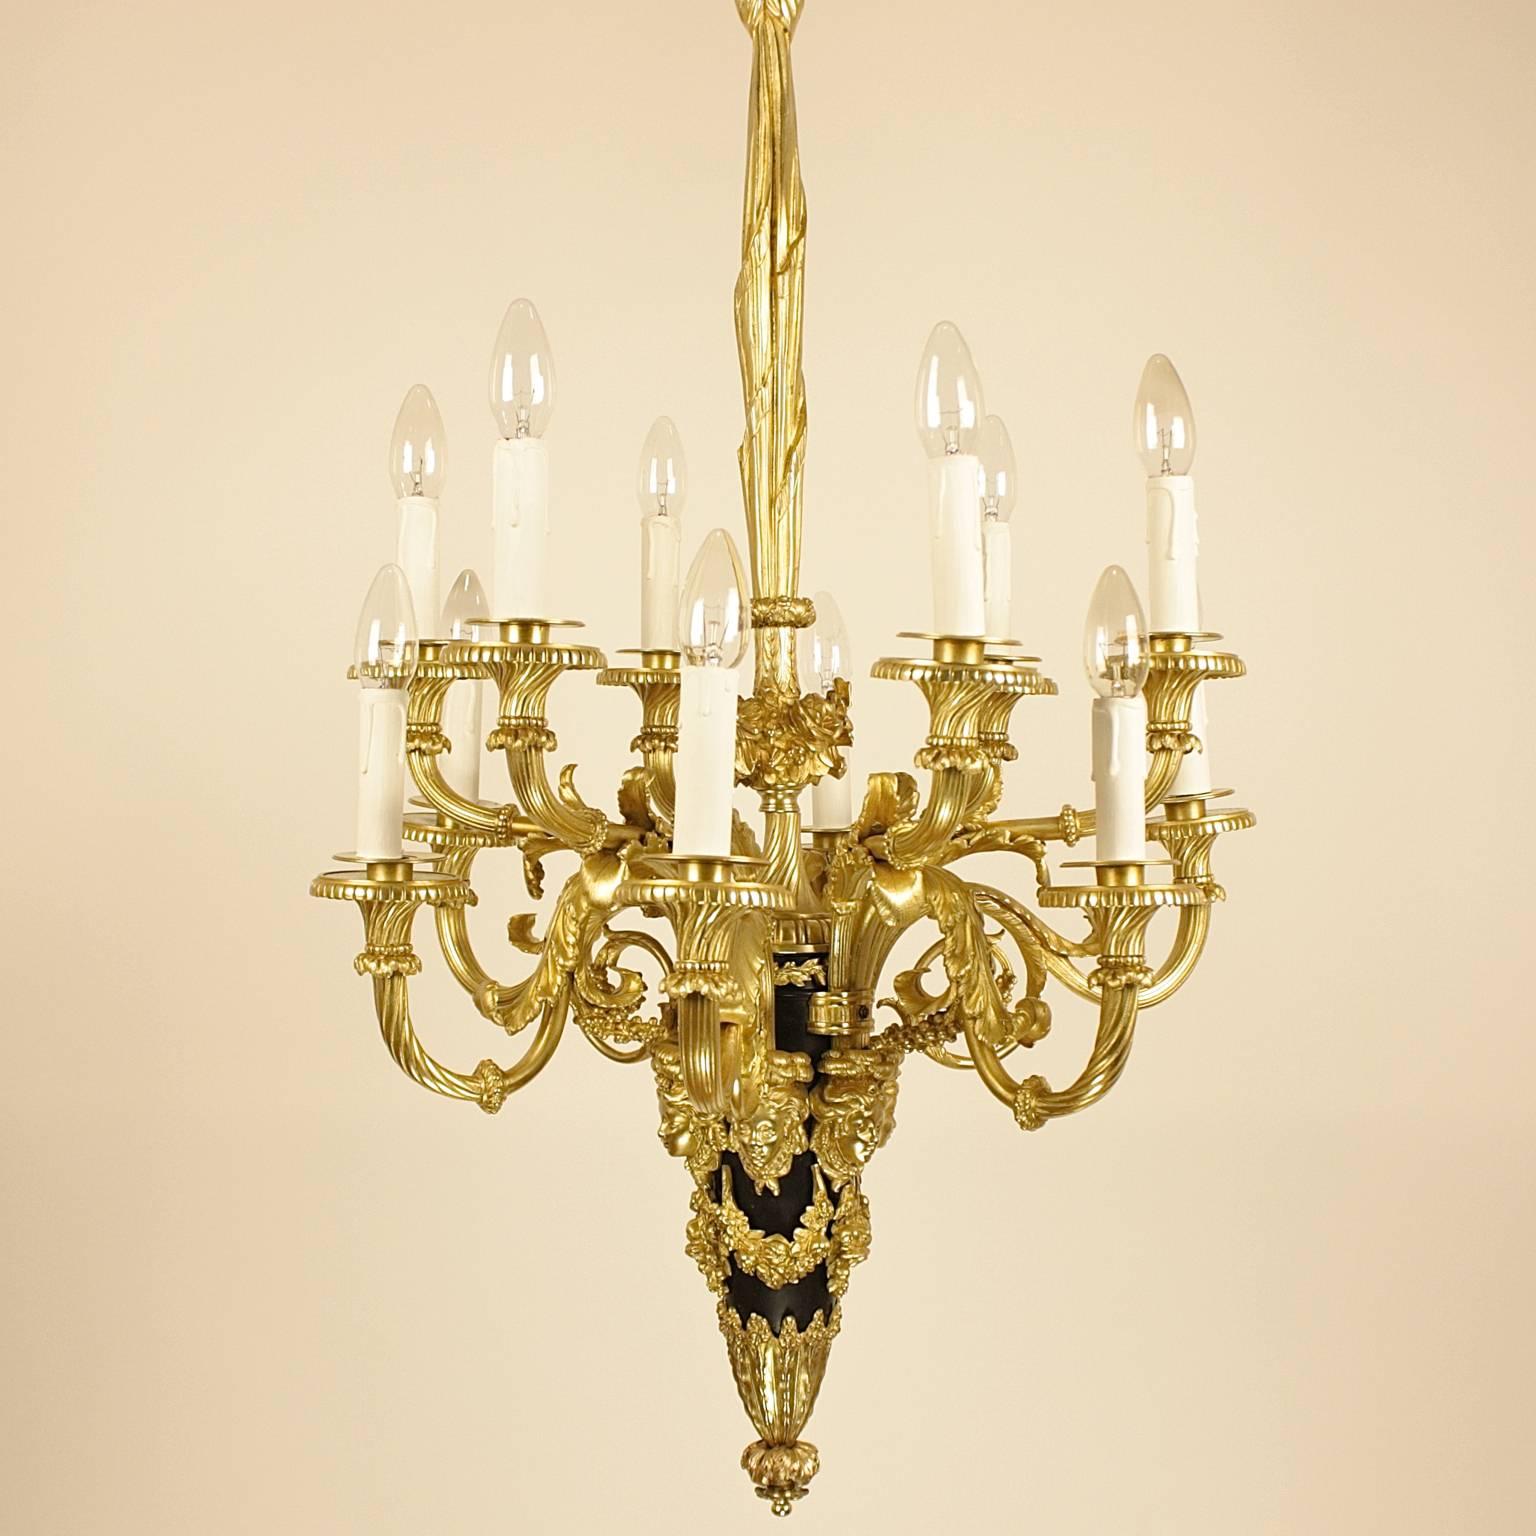 19th Century French Louis XVI Gilt Bronze S.Cloud Chandelier after P.P. Thomire attr. Beurdeley

A magnificient twelve-light gilt bronze chandelier with a central shaft chased with festoons, flowers and foliate set off against a patinated black